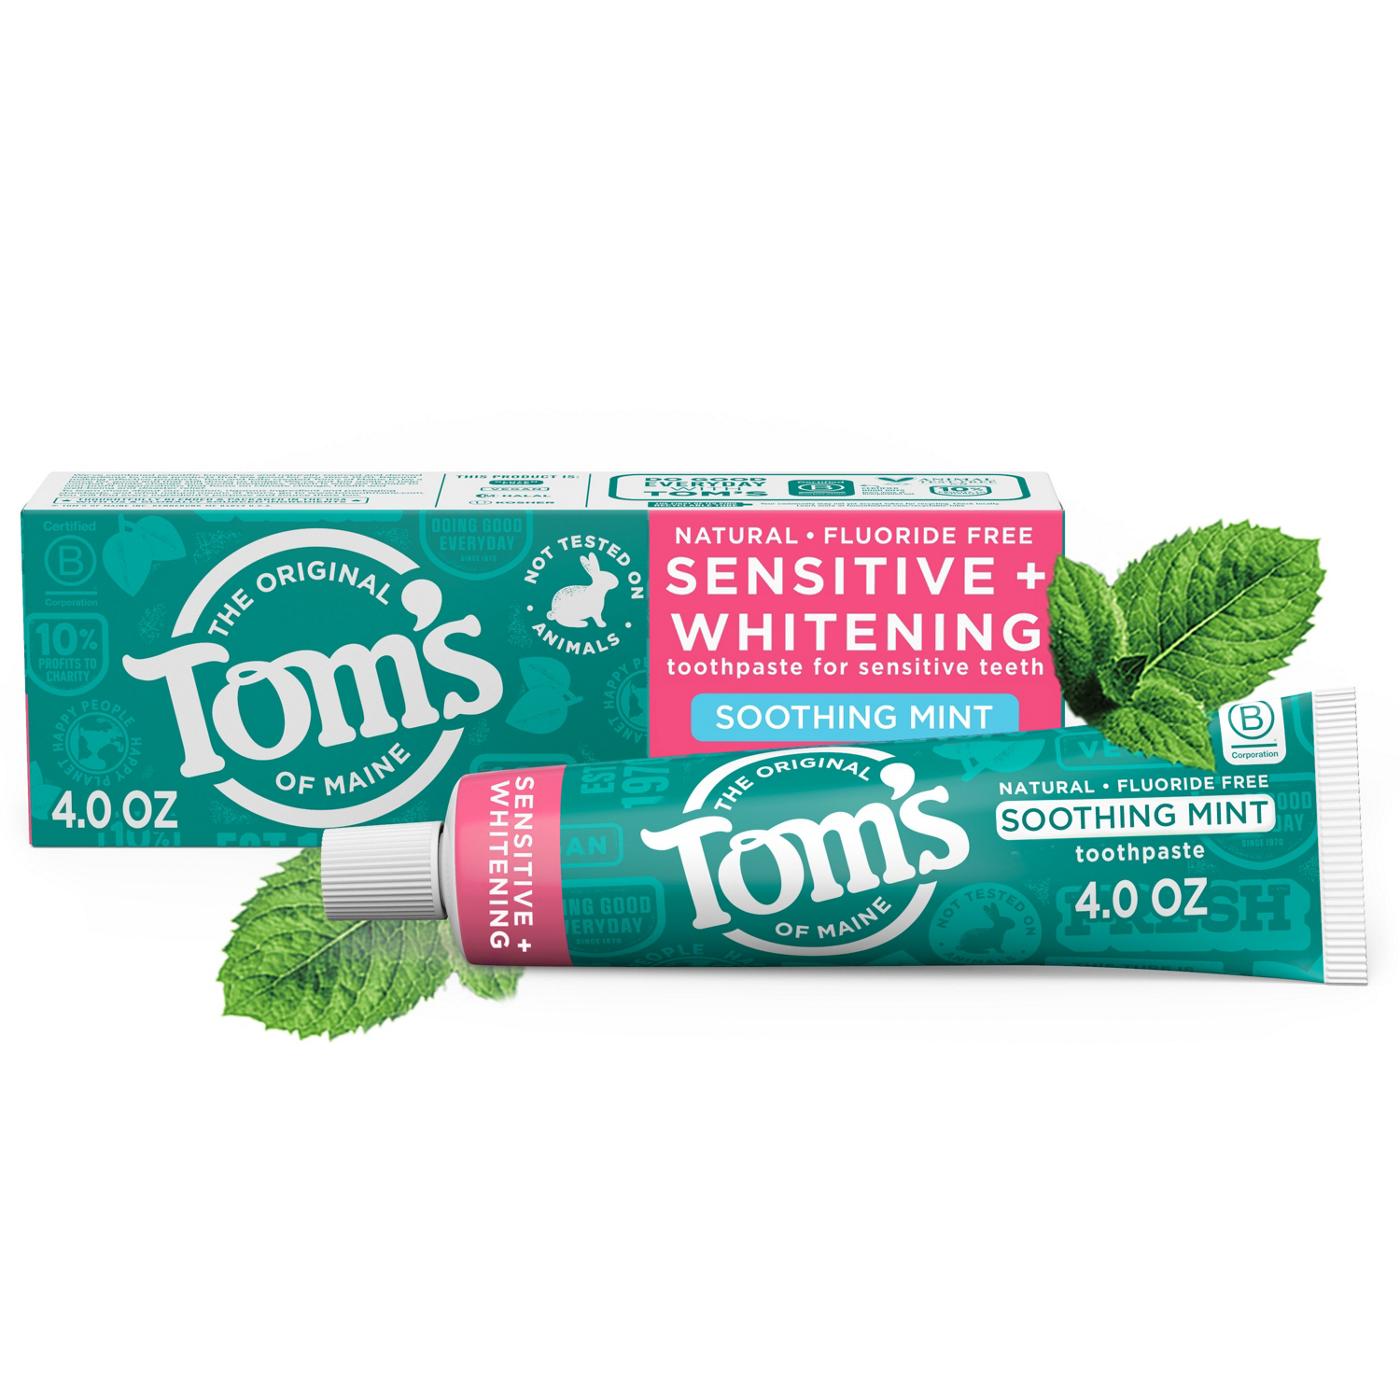 Tom's of Maine Sensitive + Whitening Toothpaste - Soothing Mint; image 8 of 9